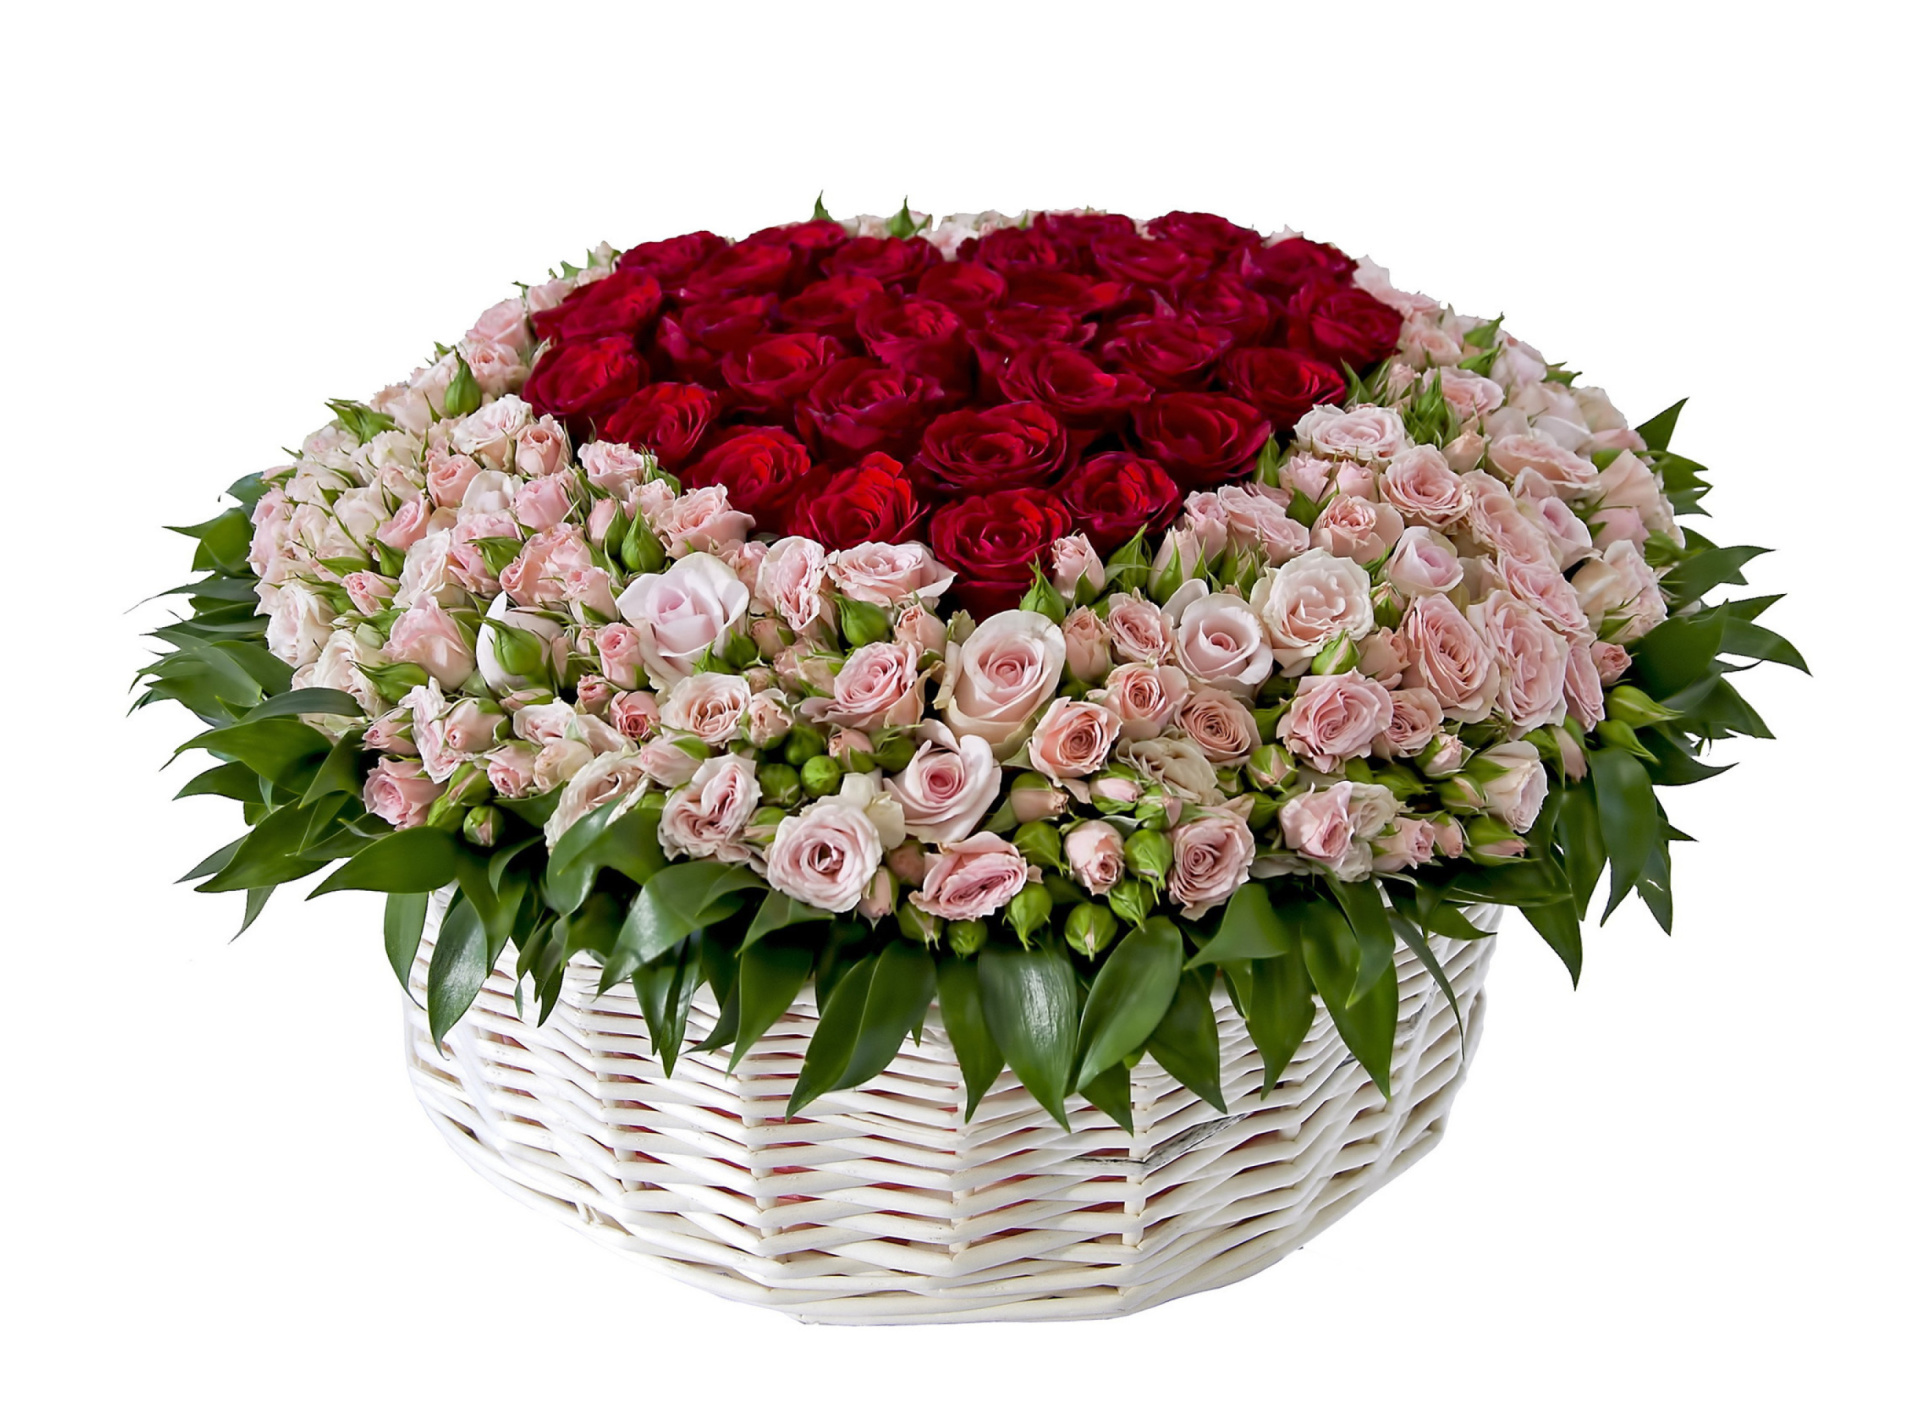 Basket of Roses from Florist wallpaper 1920x1408